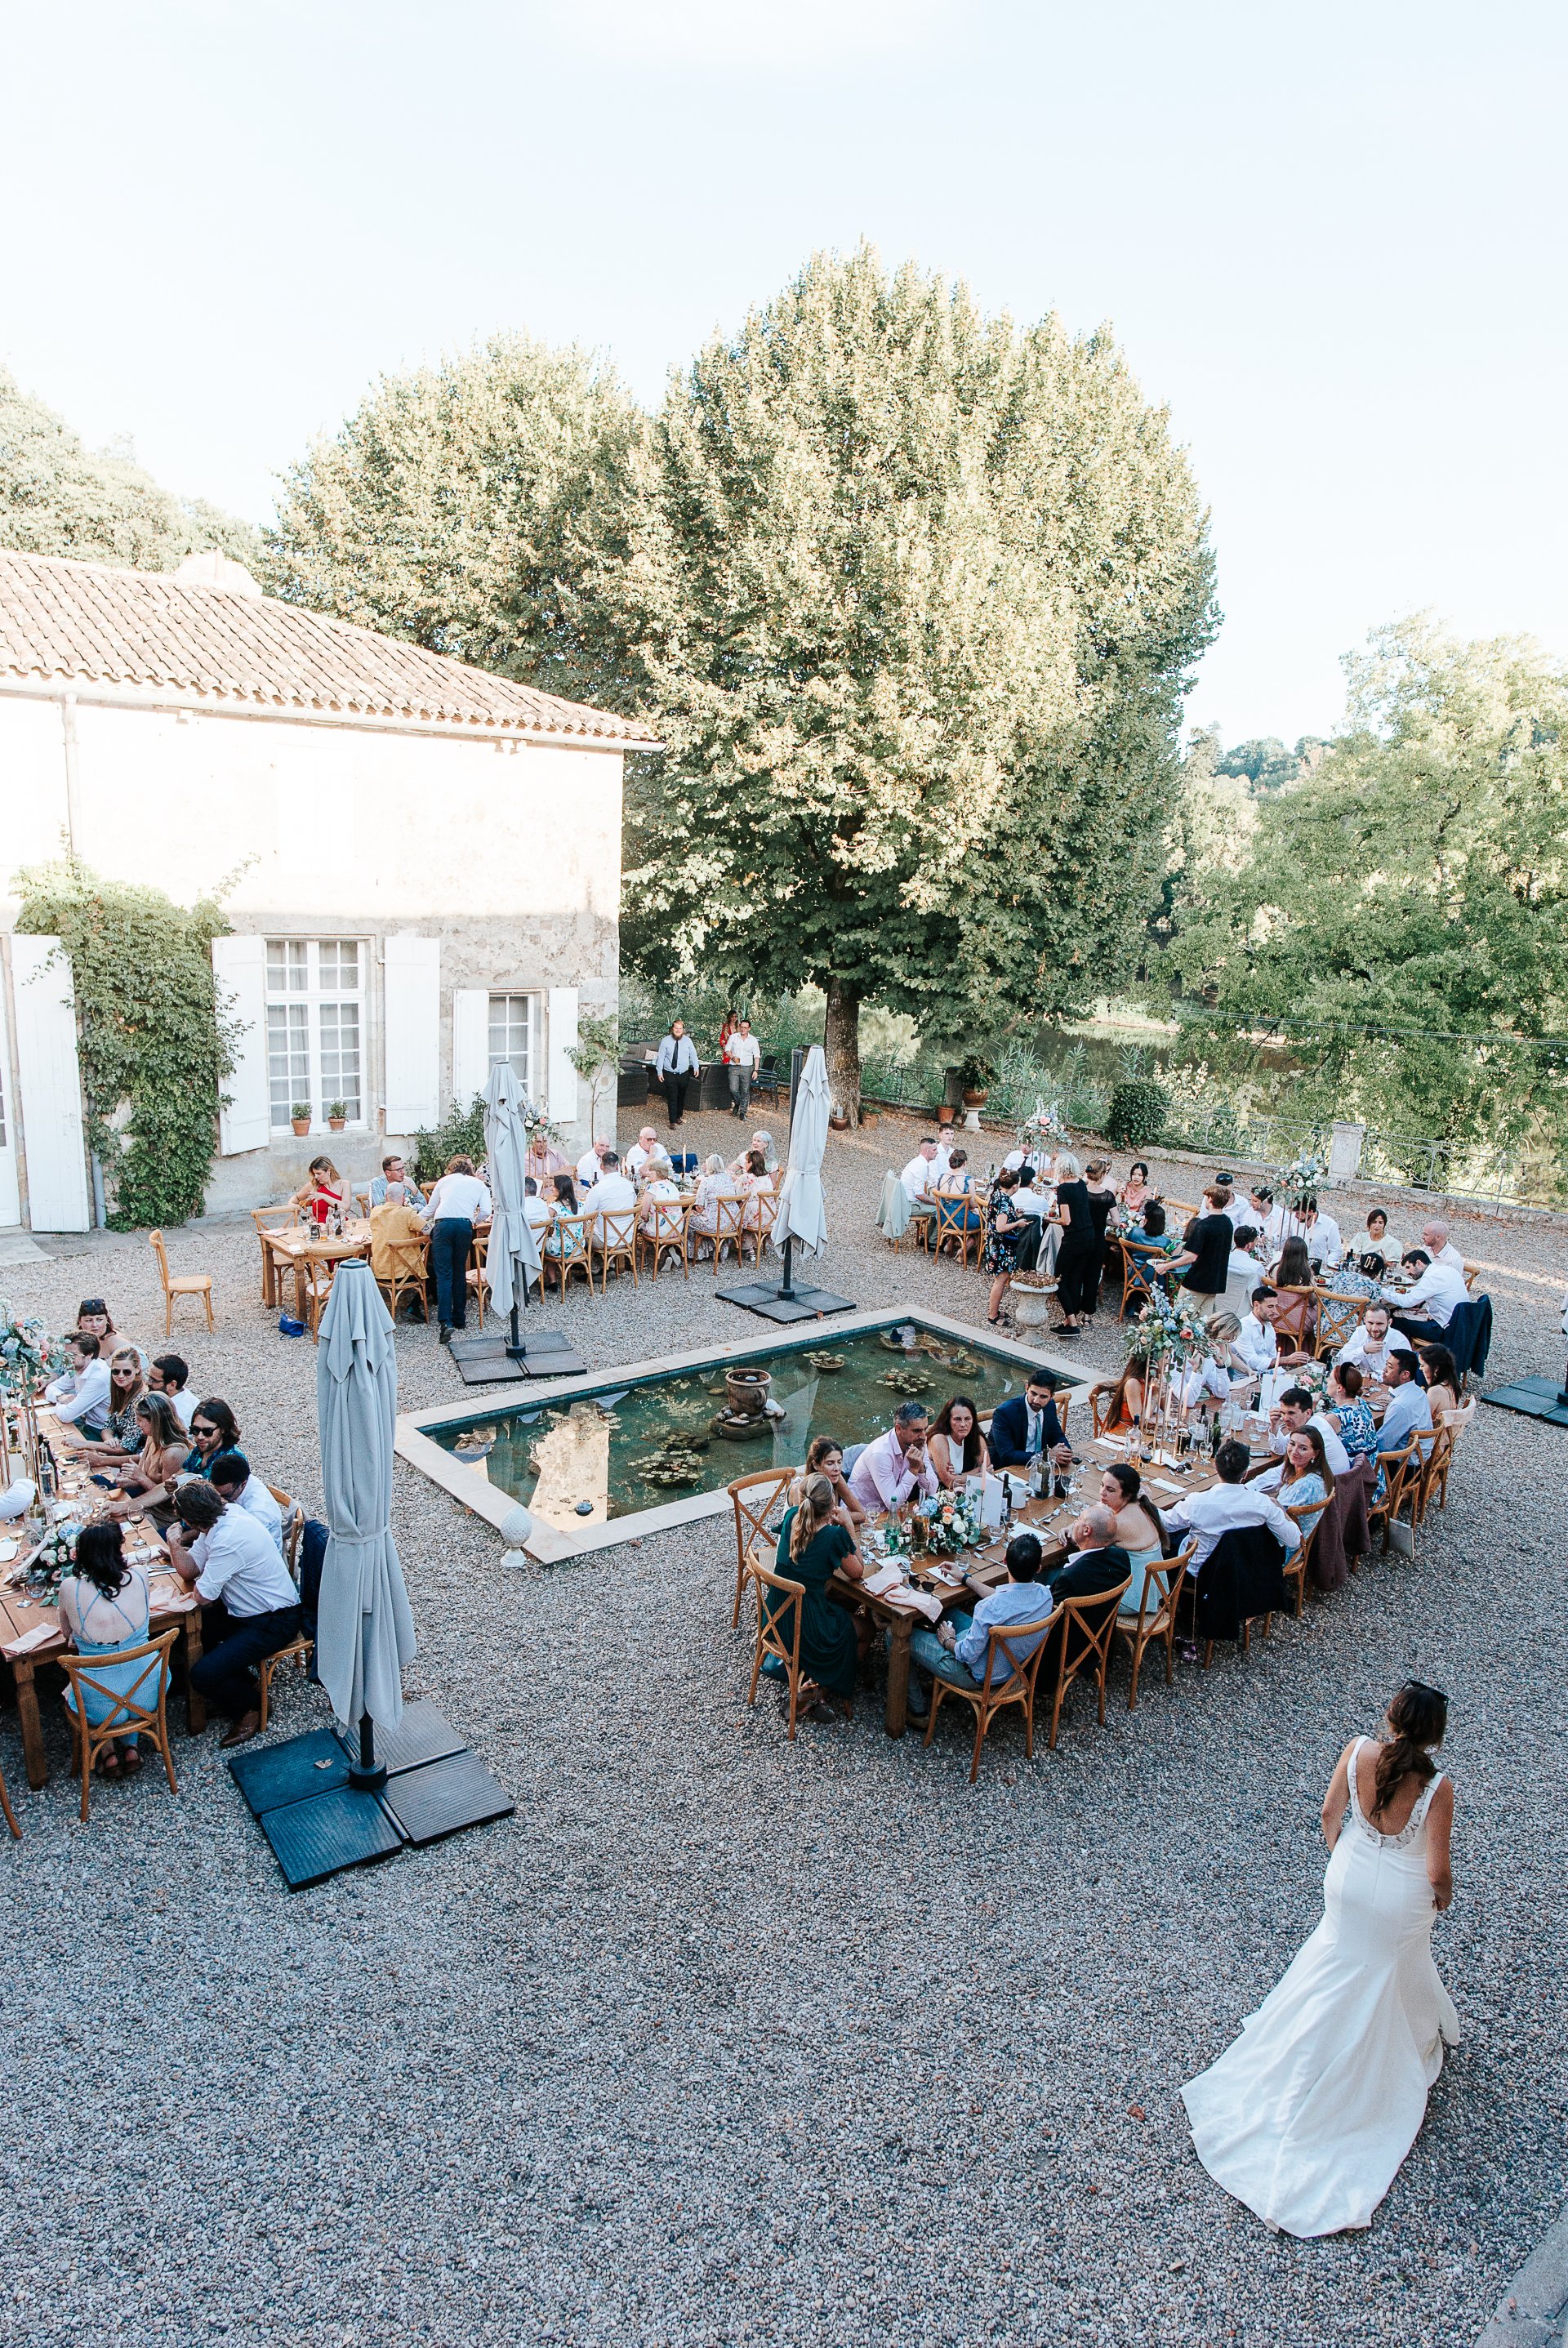 A Whimsical Wedding at a French Chateau in Provence